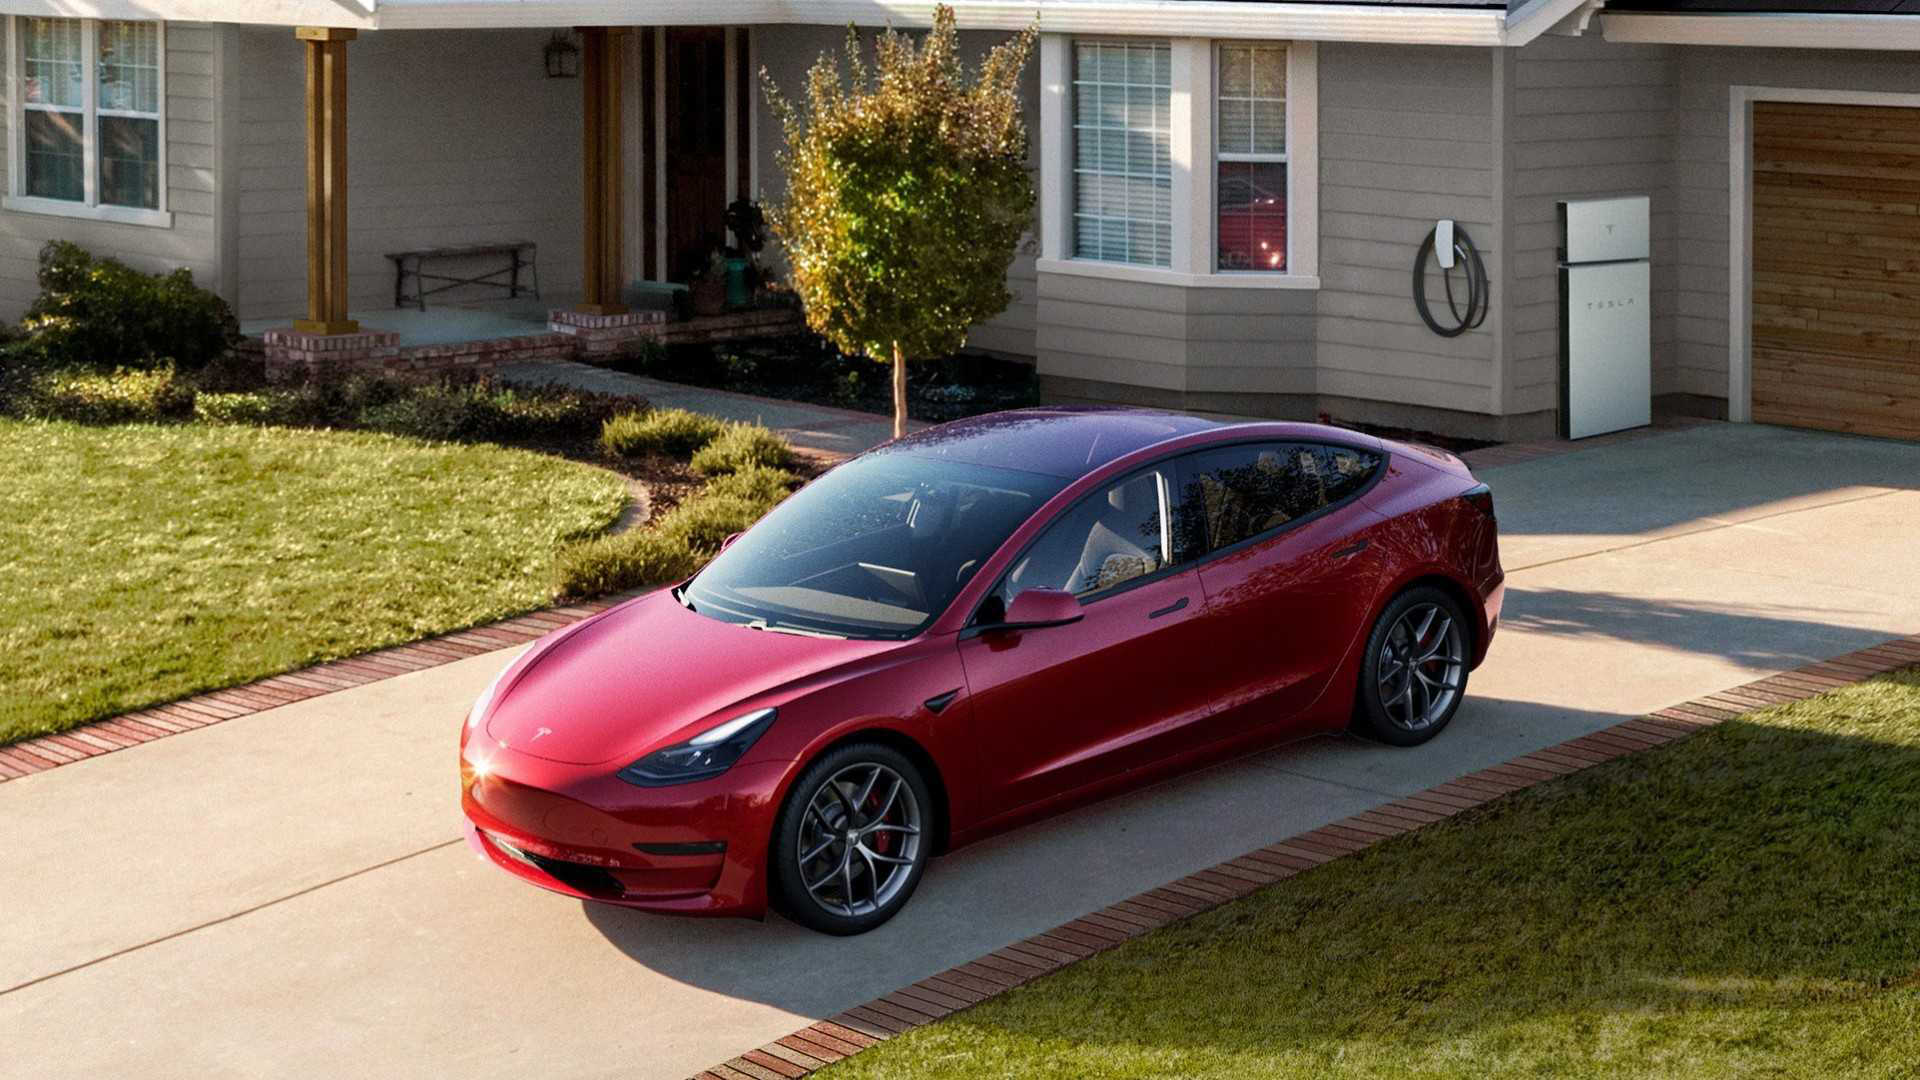 Tesla Cuts Prices On Model 3 Inventory In The US By Up To $5,500